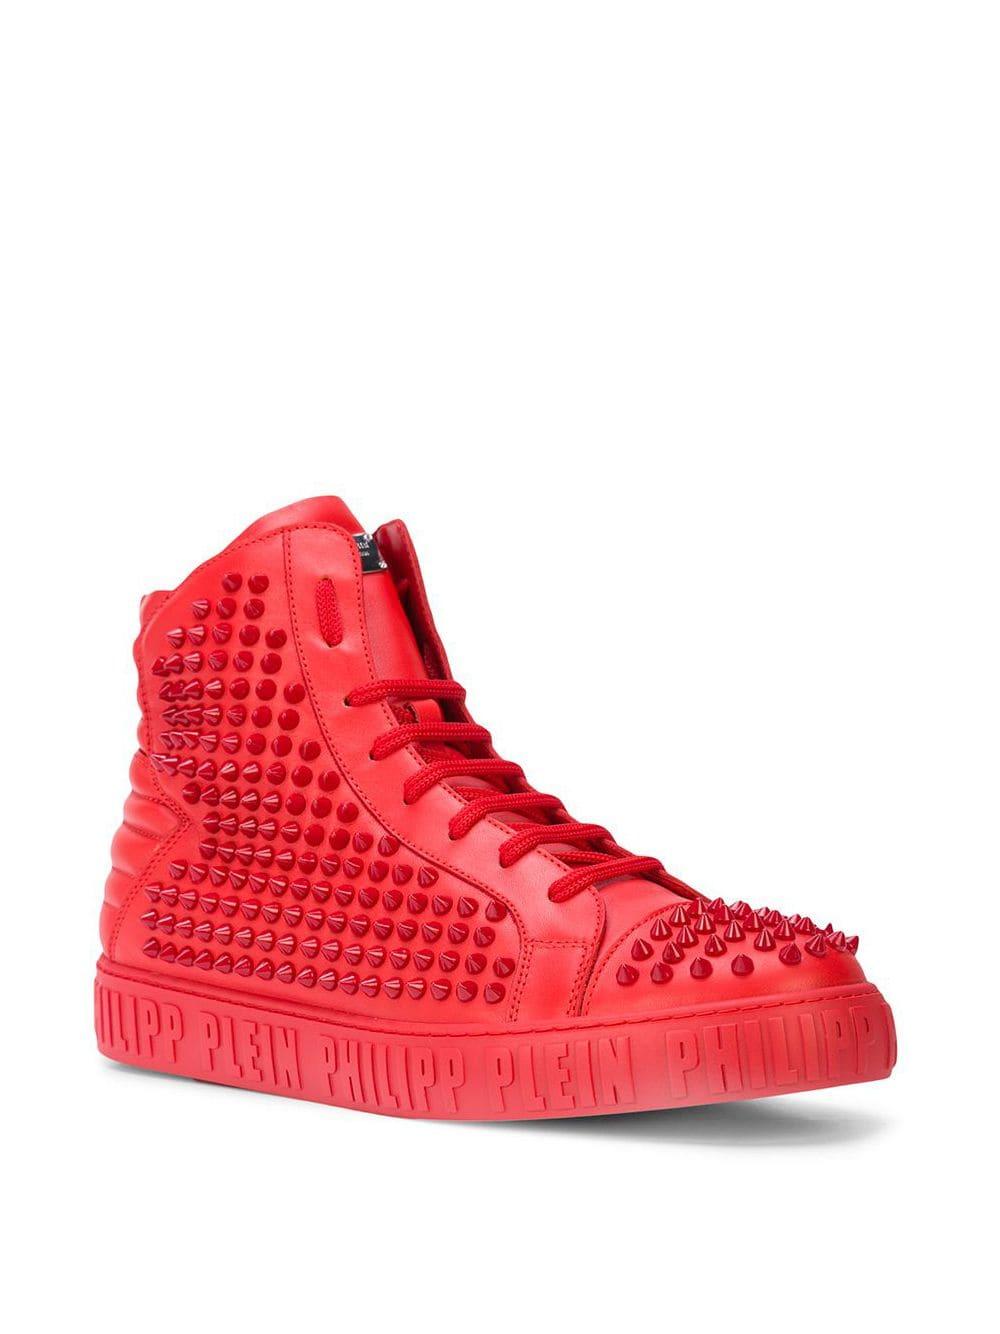 Philipp Plein Leather Studded Hi-top Sneakers in Red for Men - Lyst